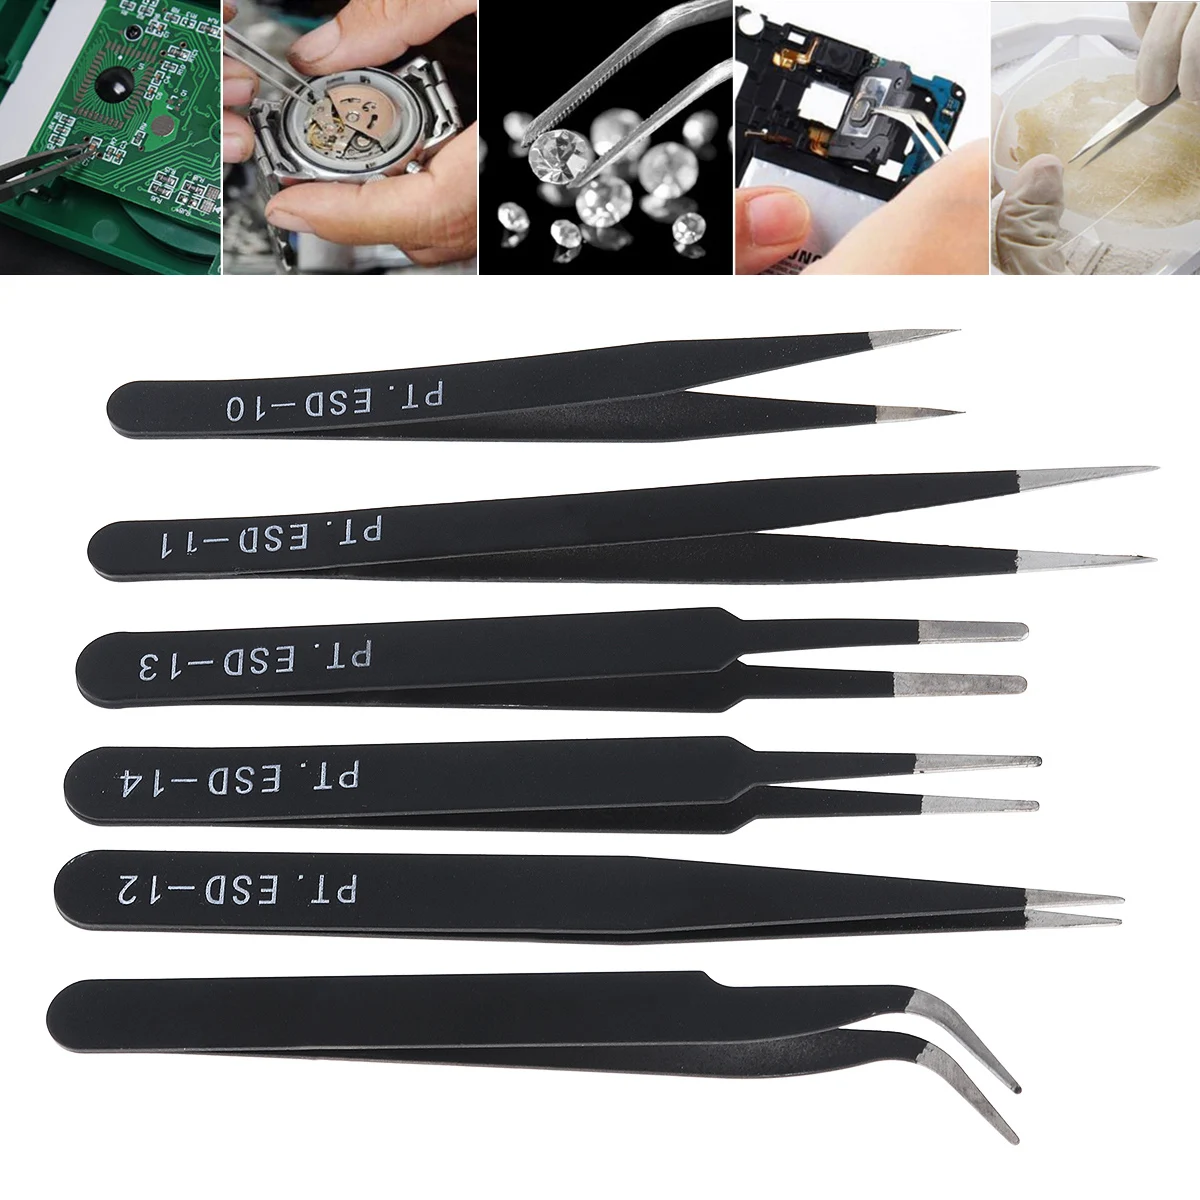 

3-9pcs Electronic Industrial Tweezers Set Stainless Steel Anti-static Straight Curved Precision Tweezer Jewelry Repair Hand Tool